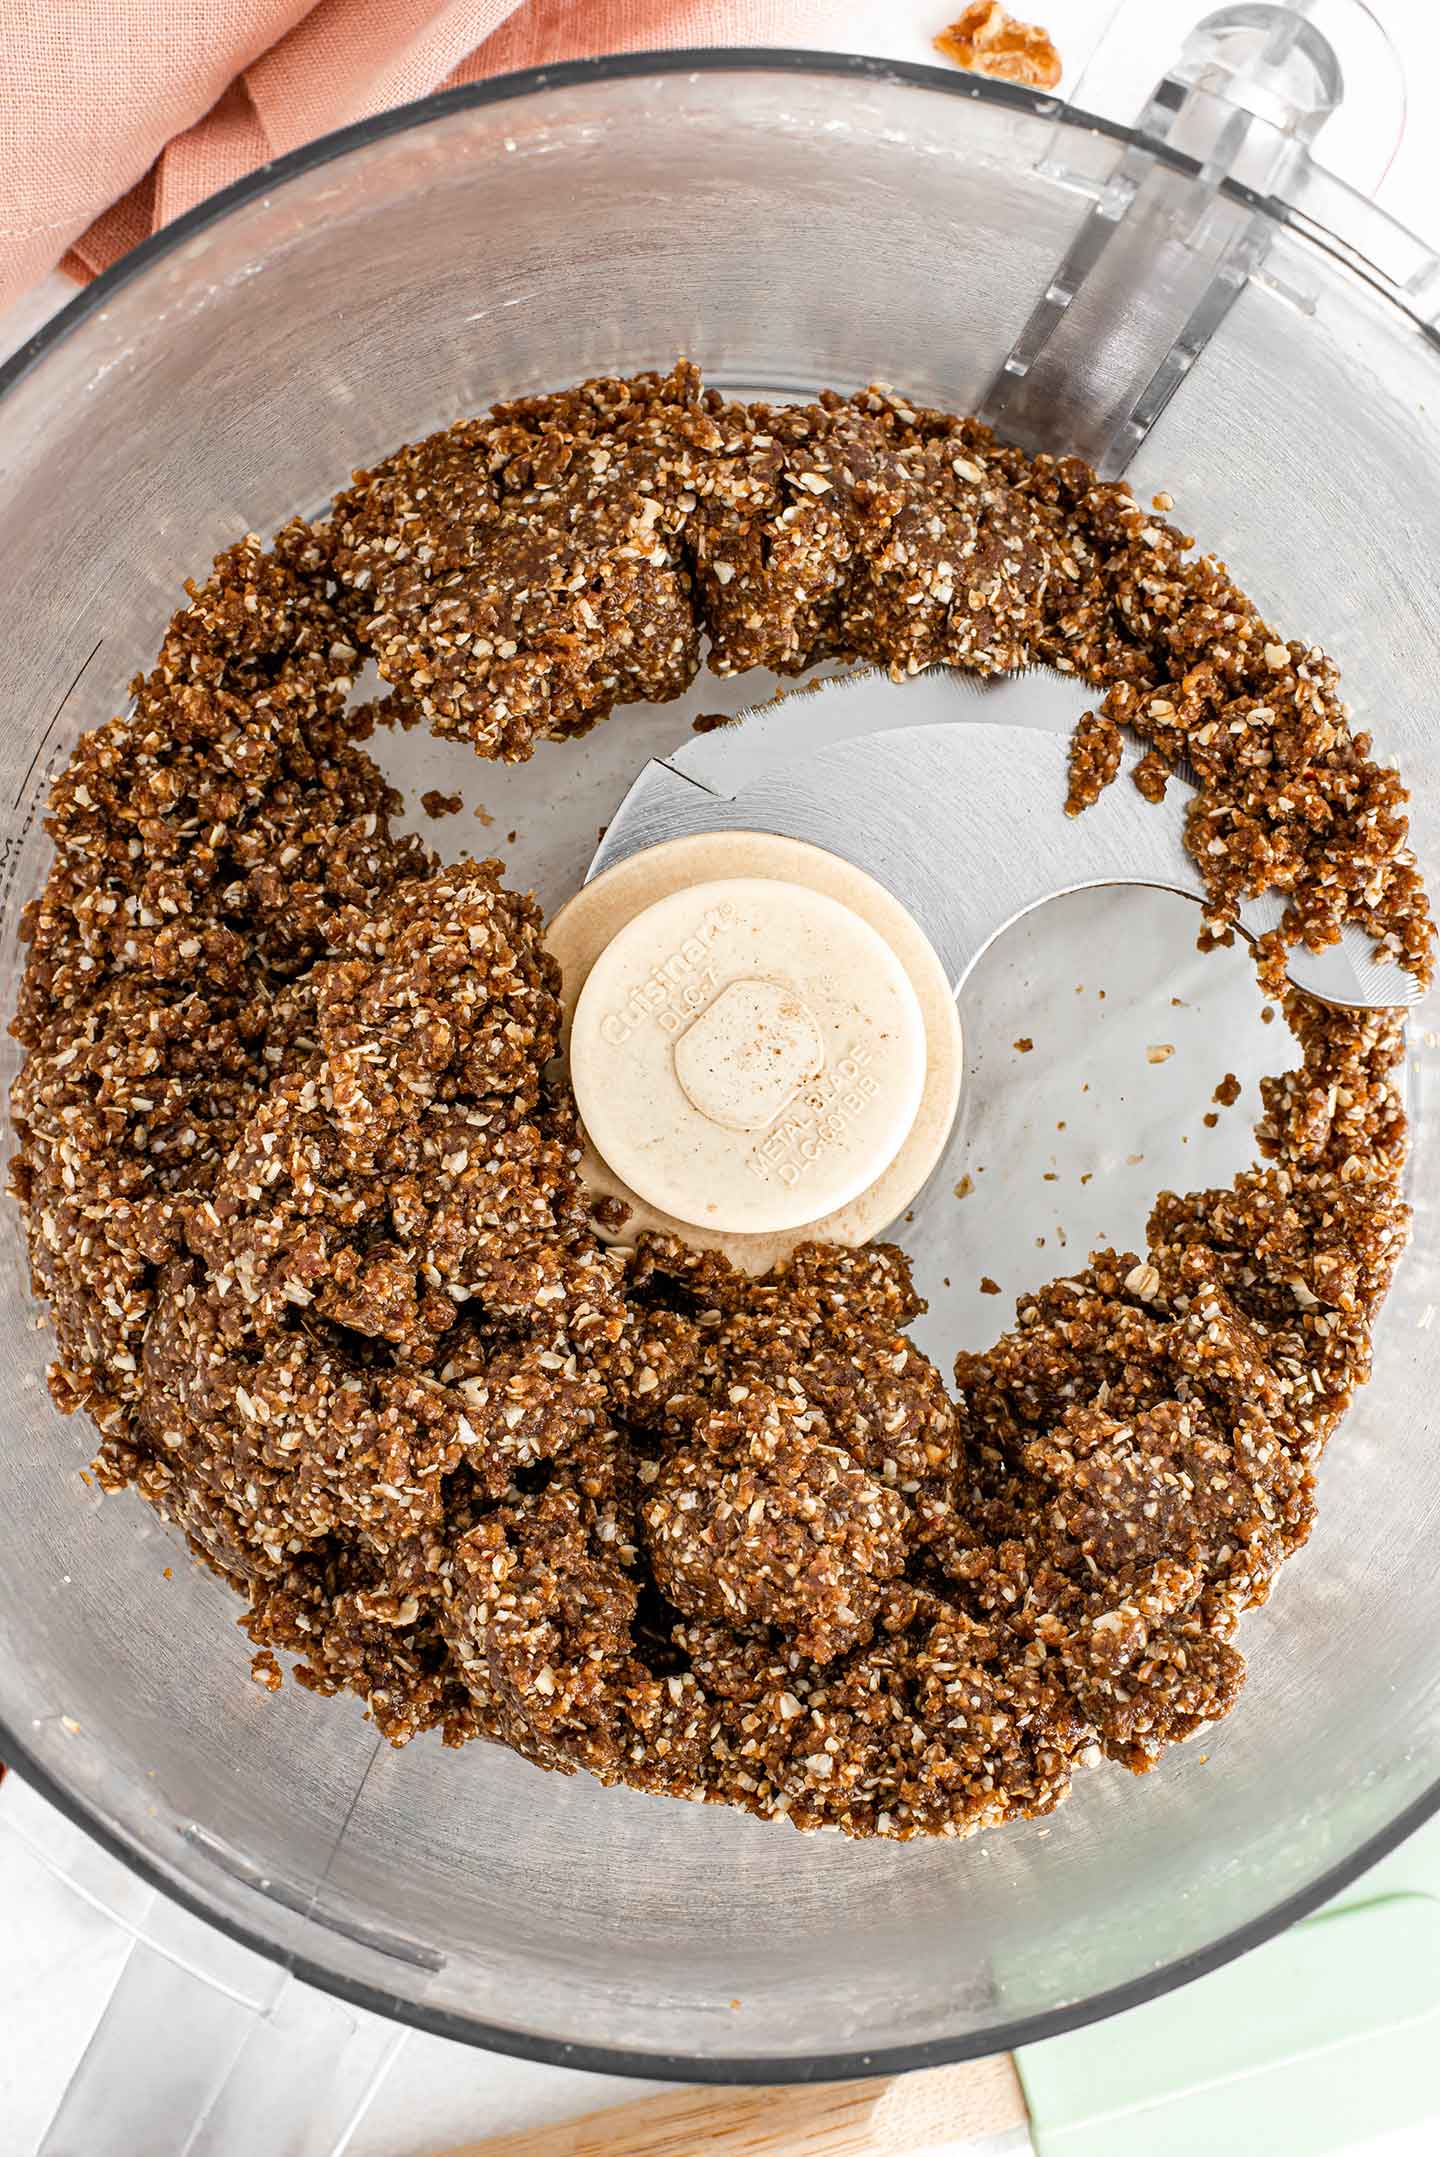 Top down view of a sticky somewhat crumbly dough in the bowl of a food processor.